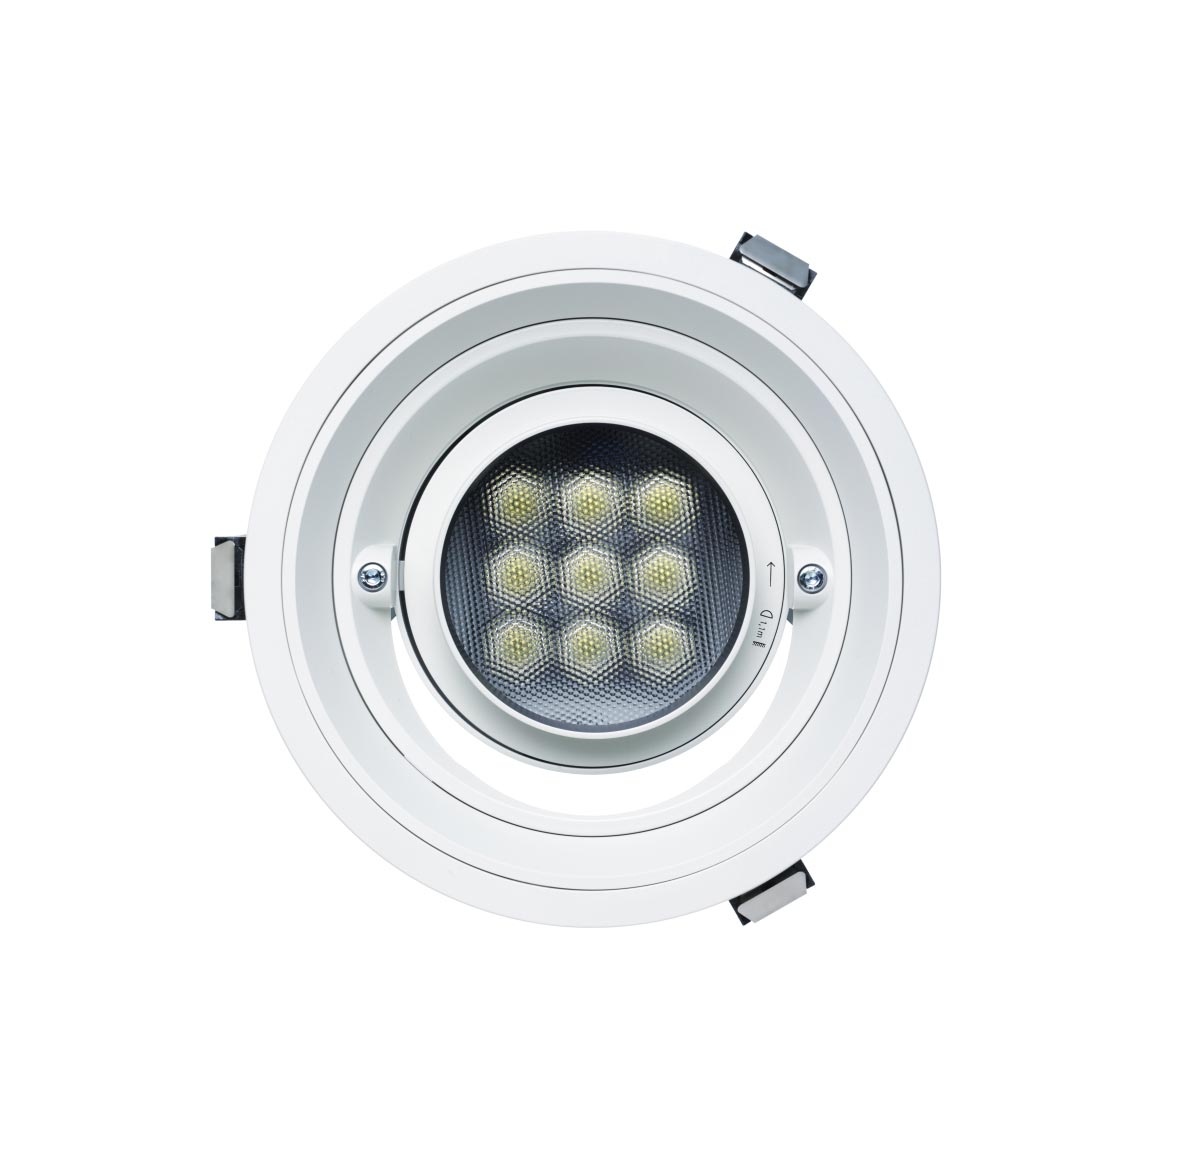 Quintessence Round Recessed Adjustable Spotlight With Regressed Mounting Tray Wide Flood Beam 18W LED 4000K DALI White Trim F/P